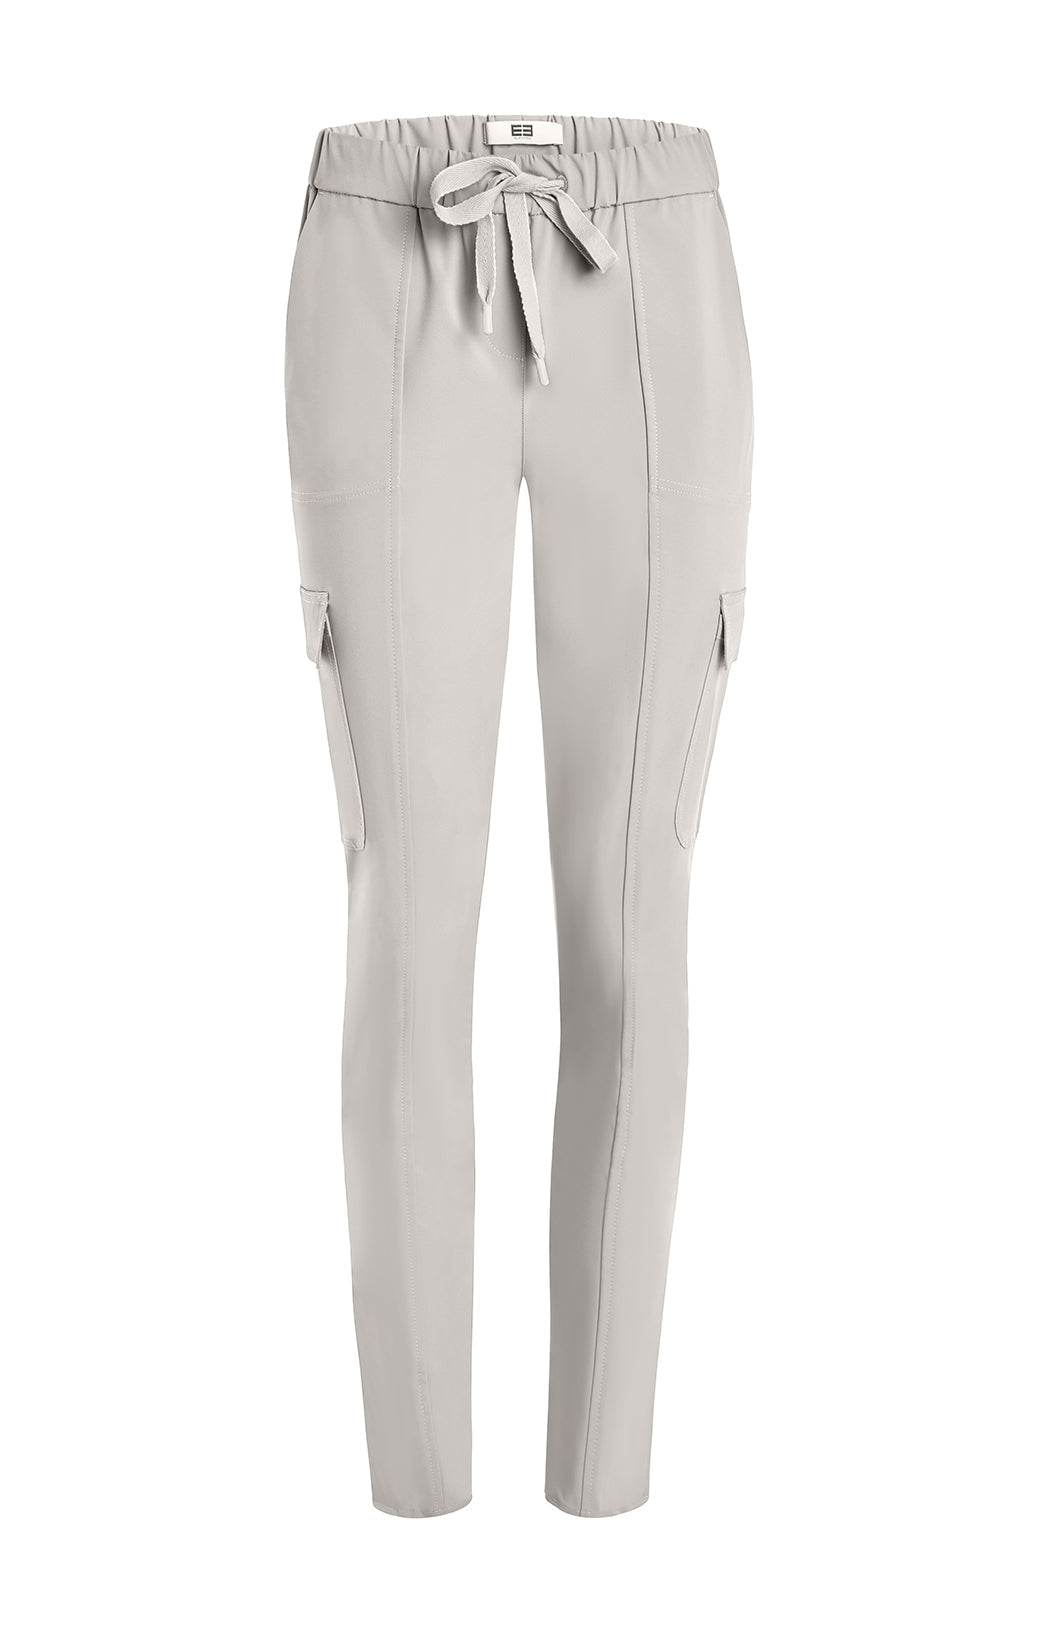 Sand Dollar - Tailored Pants In Stretch Cotton Suiting - Product Image